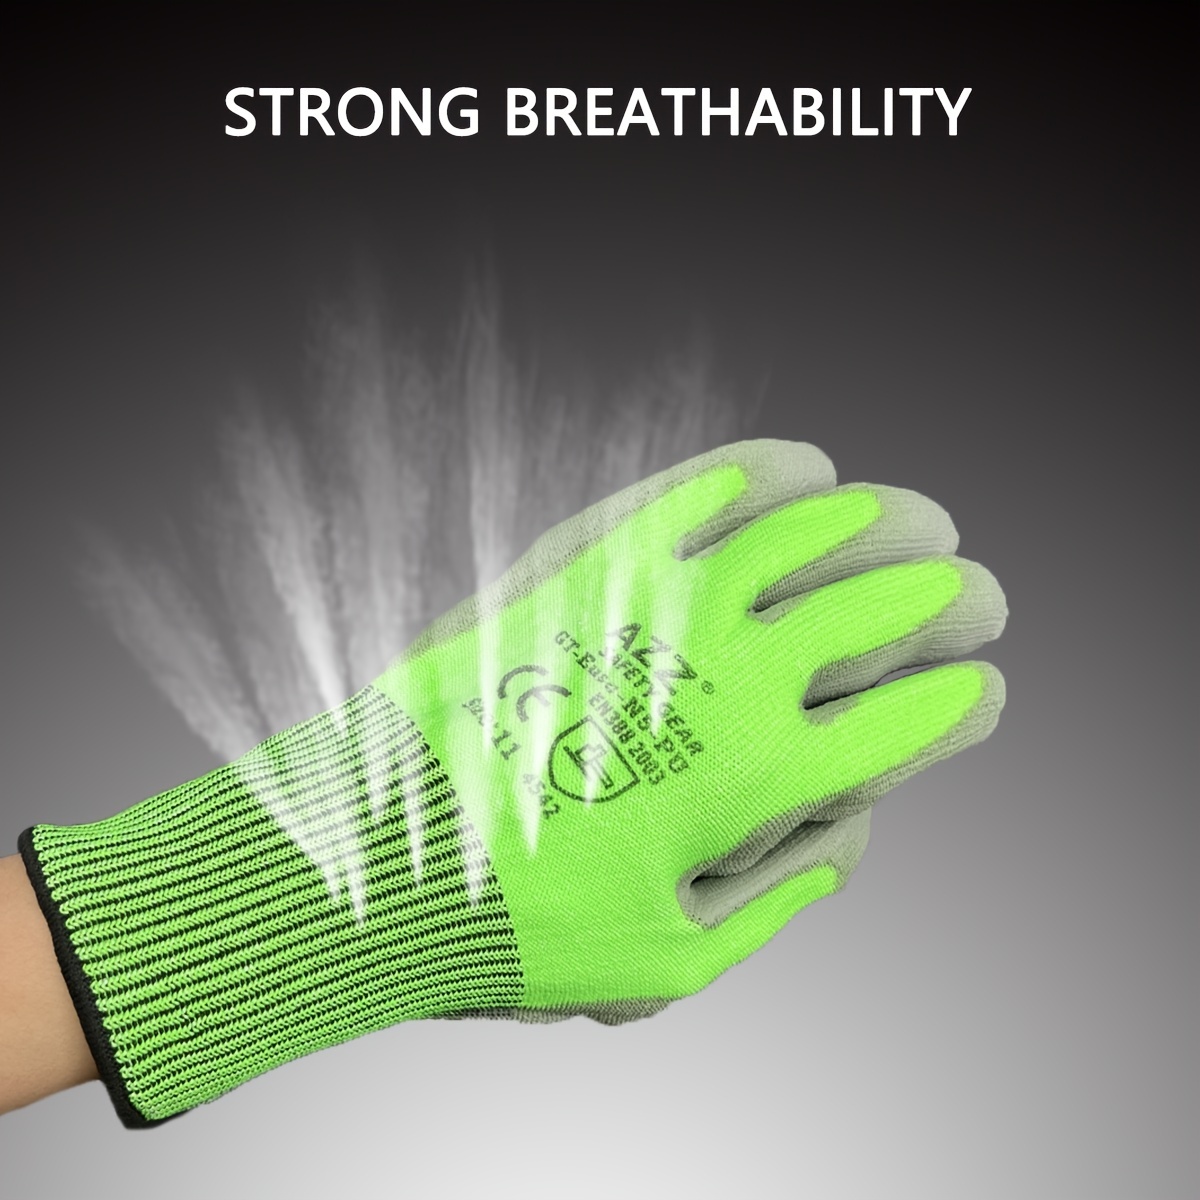 1pair Cut Resistant With High Performance EN-388 Level 5 Protection For  Your Hands Safety. Professional Gloves For Cutting, Chopping, Fish  Filleting